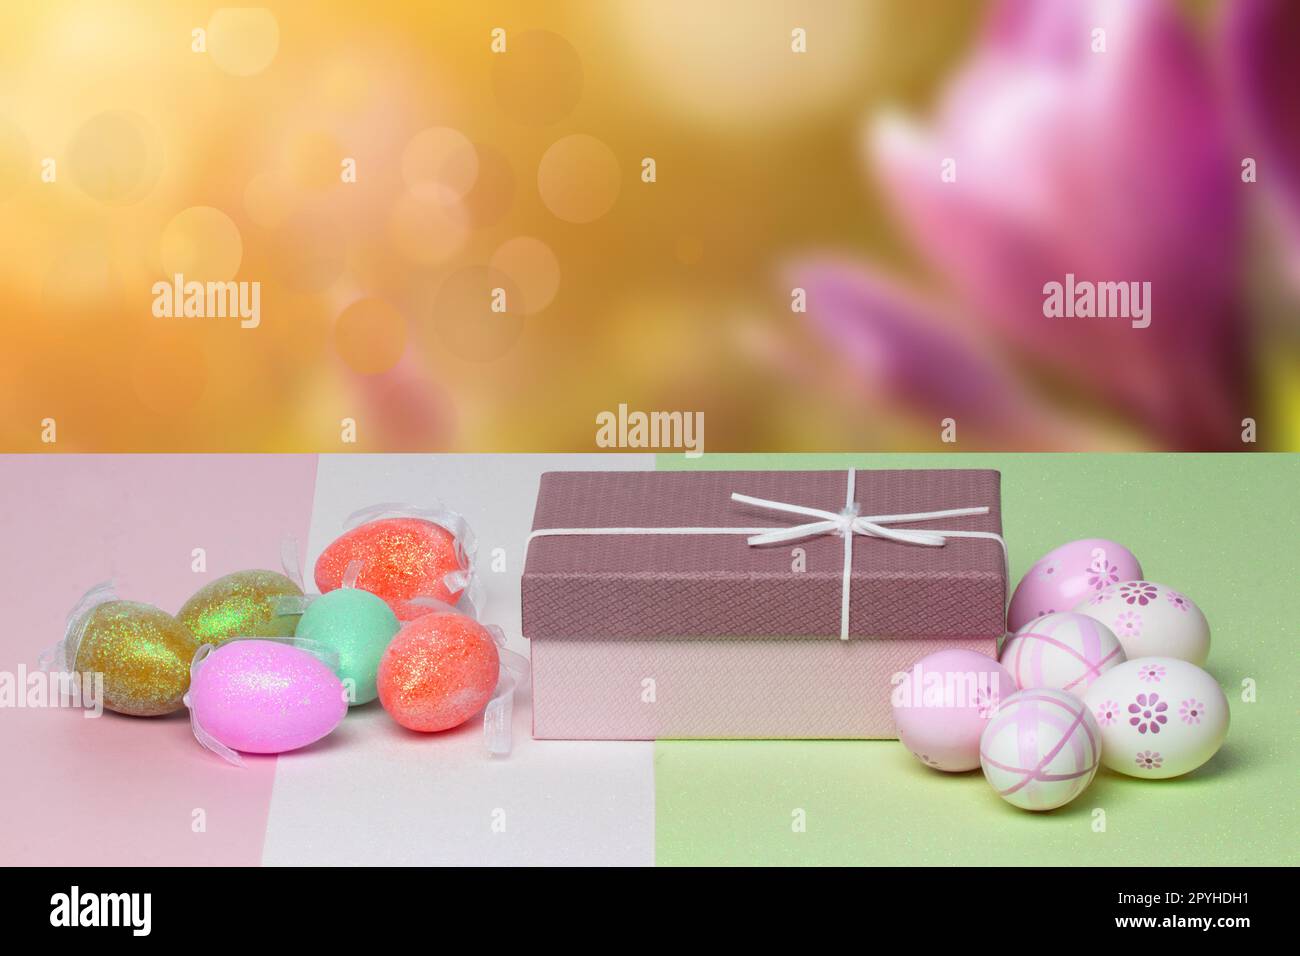 Easter greeting card template. Close-up of colorful eggs and a gift box on a multicolor table against abstract spring background. Copy space for your text design. Stock Photo